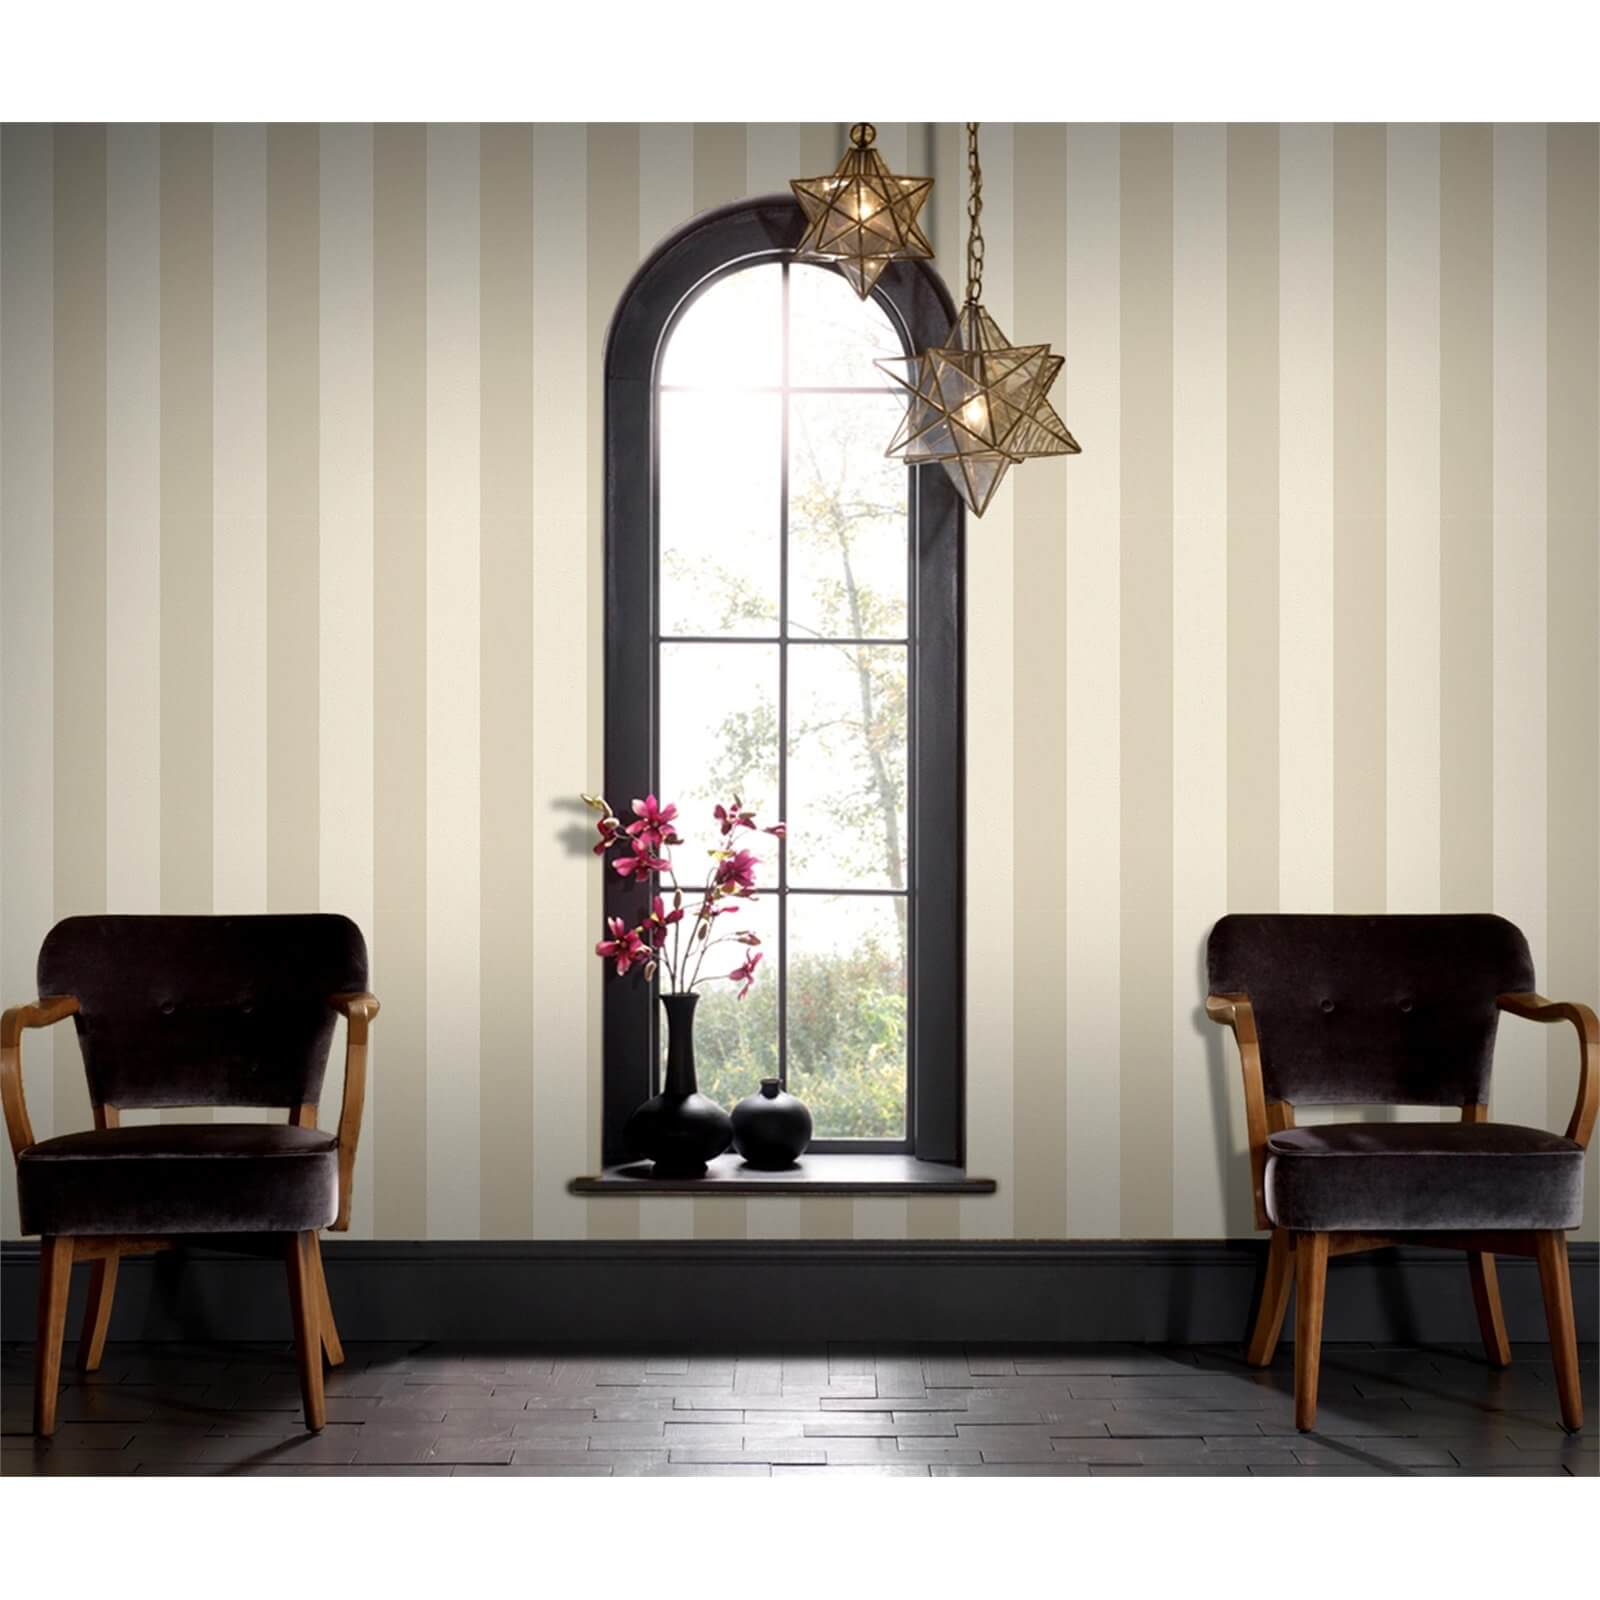 Boutique Water Silk Stripe Wallpaper - Ivory/Taupe